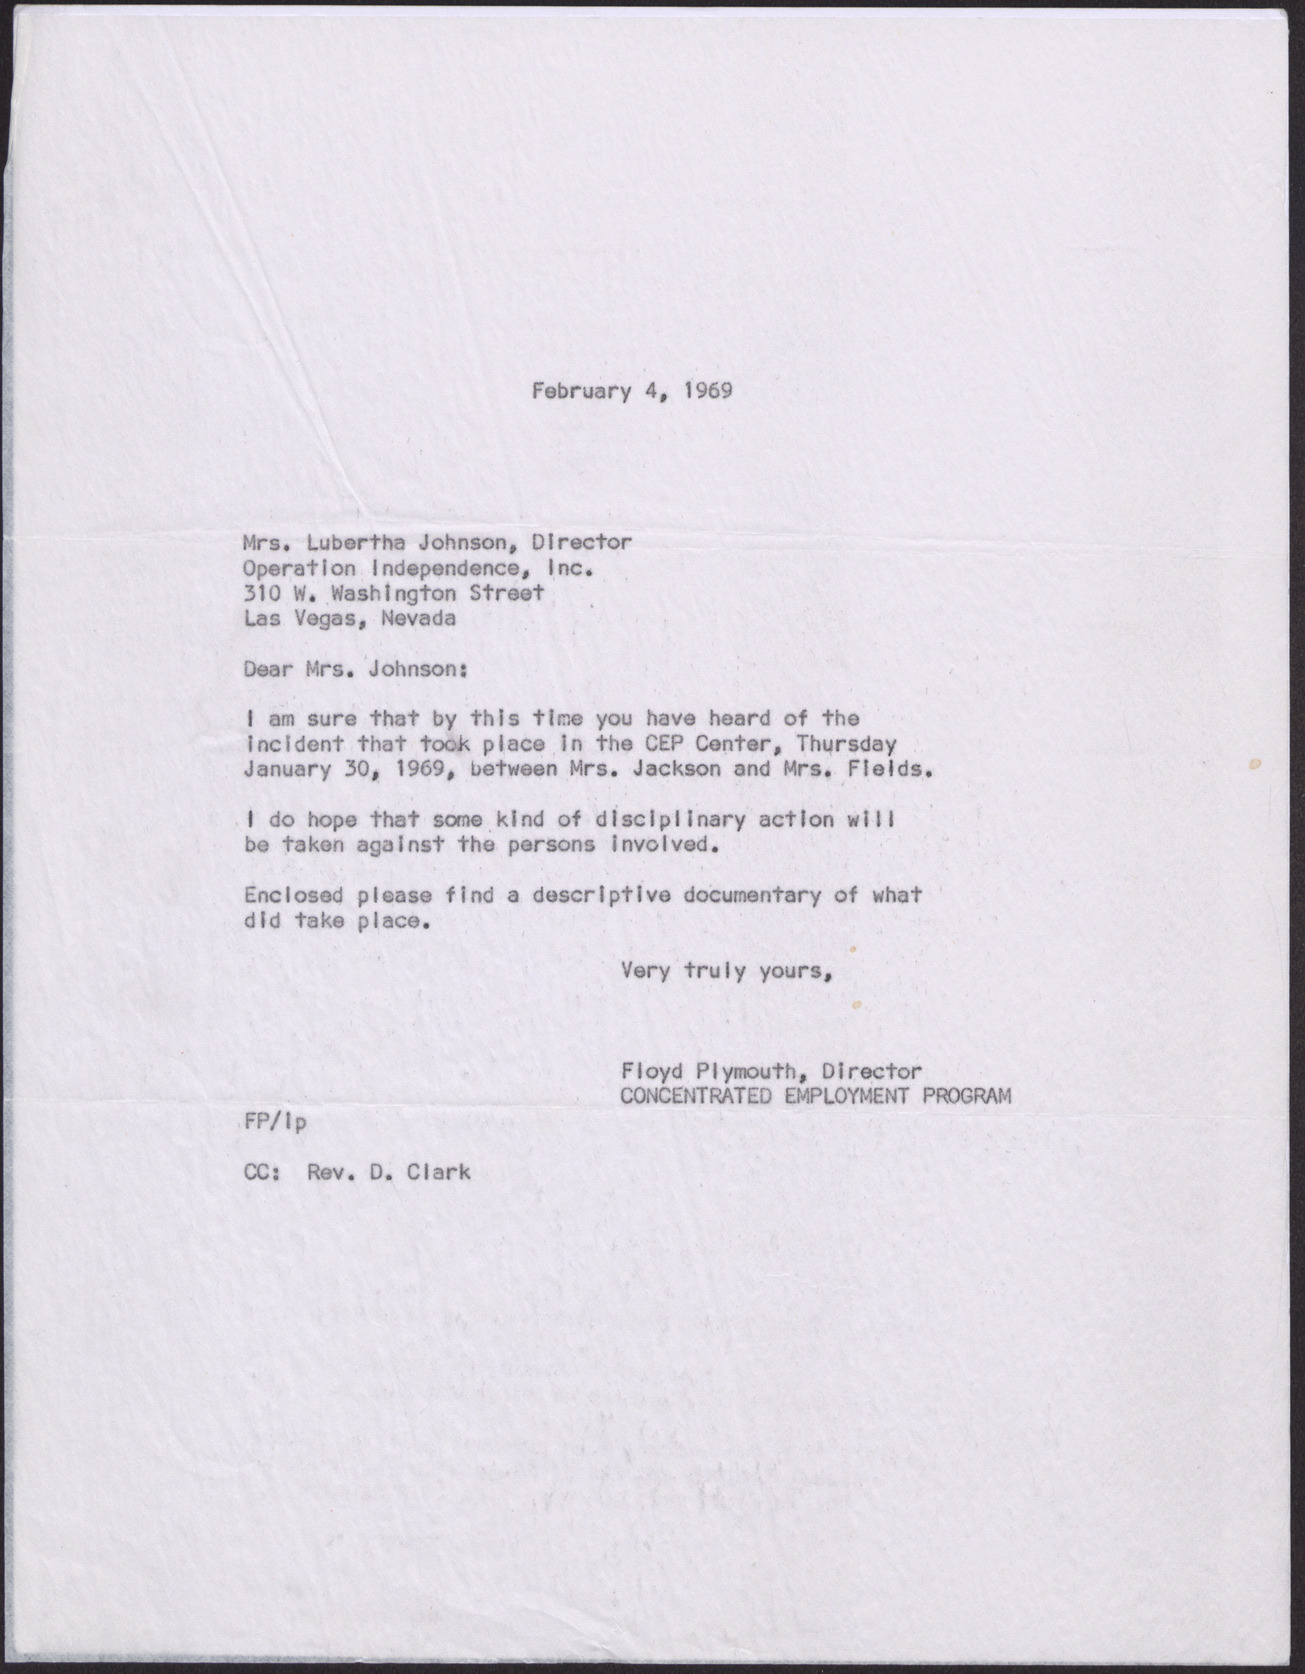 Letter to Mrs. Lubertha Johnson from Floyd Plymouth, February 4, 1969